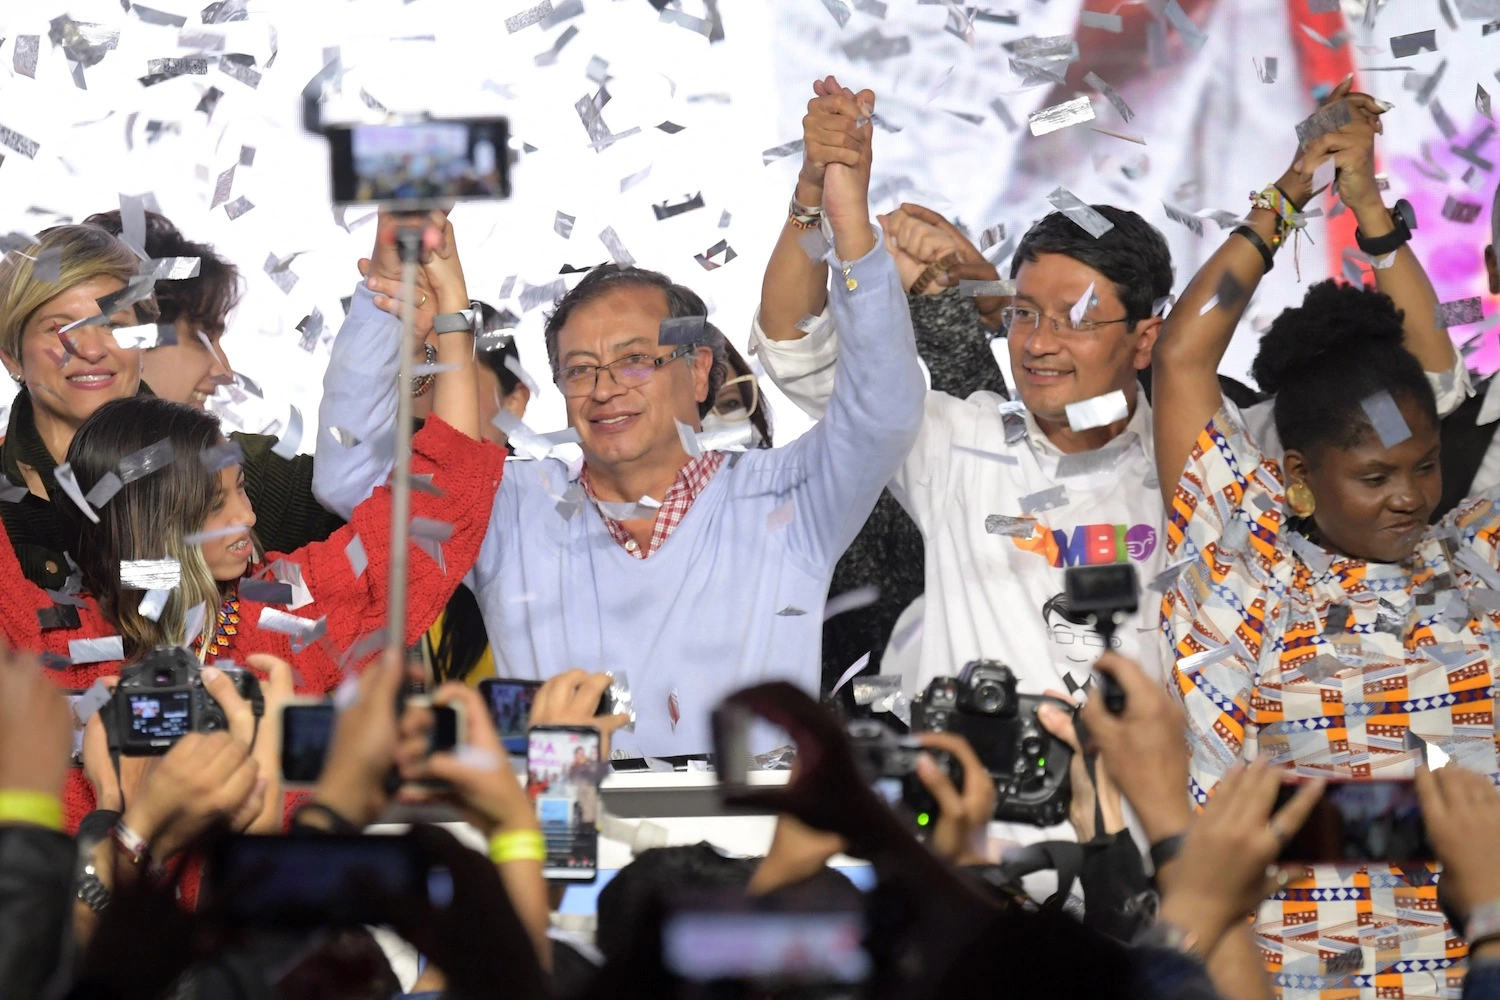 Gustavo Petro, the presidential candidate, celebrates after winning the primary for the leftist Pacto Historico coalition in Bogotá on March 13. Photo: Raul Arboleda / AFP via Getty Images.